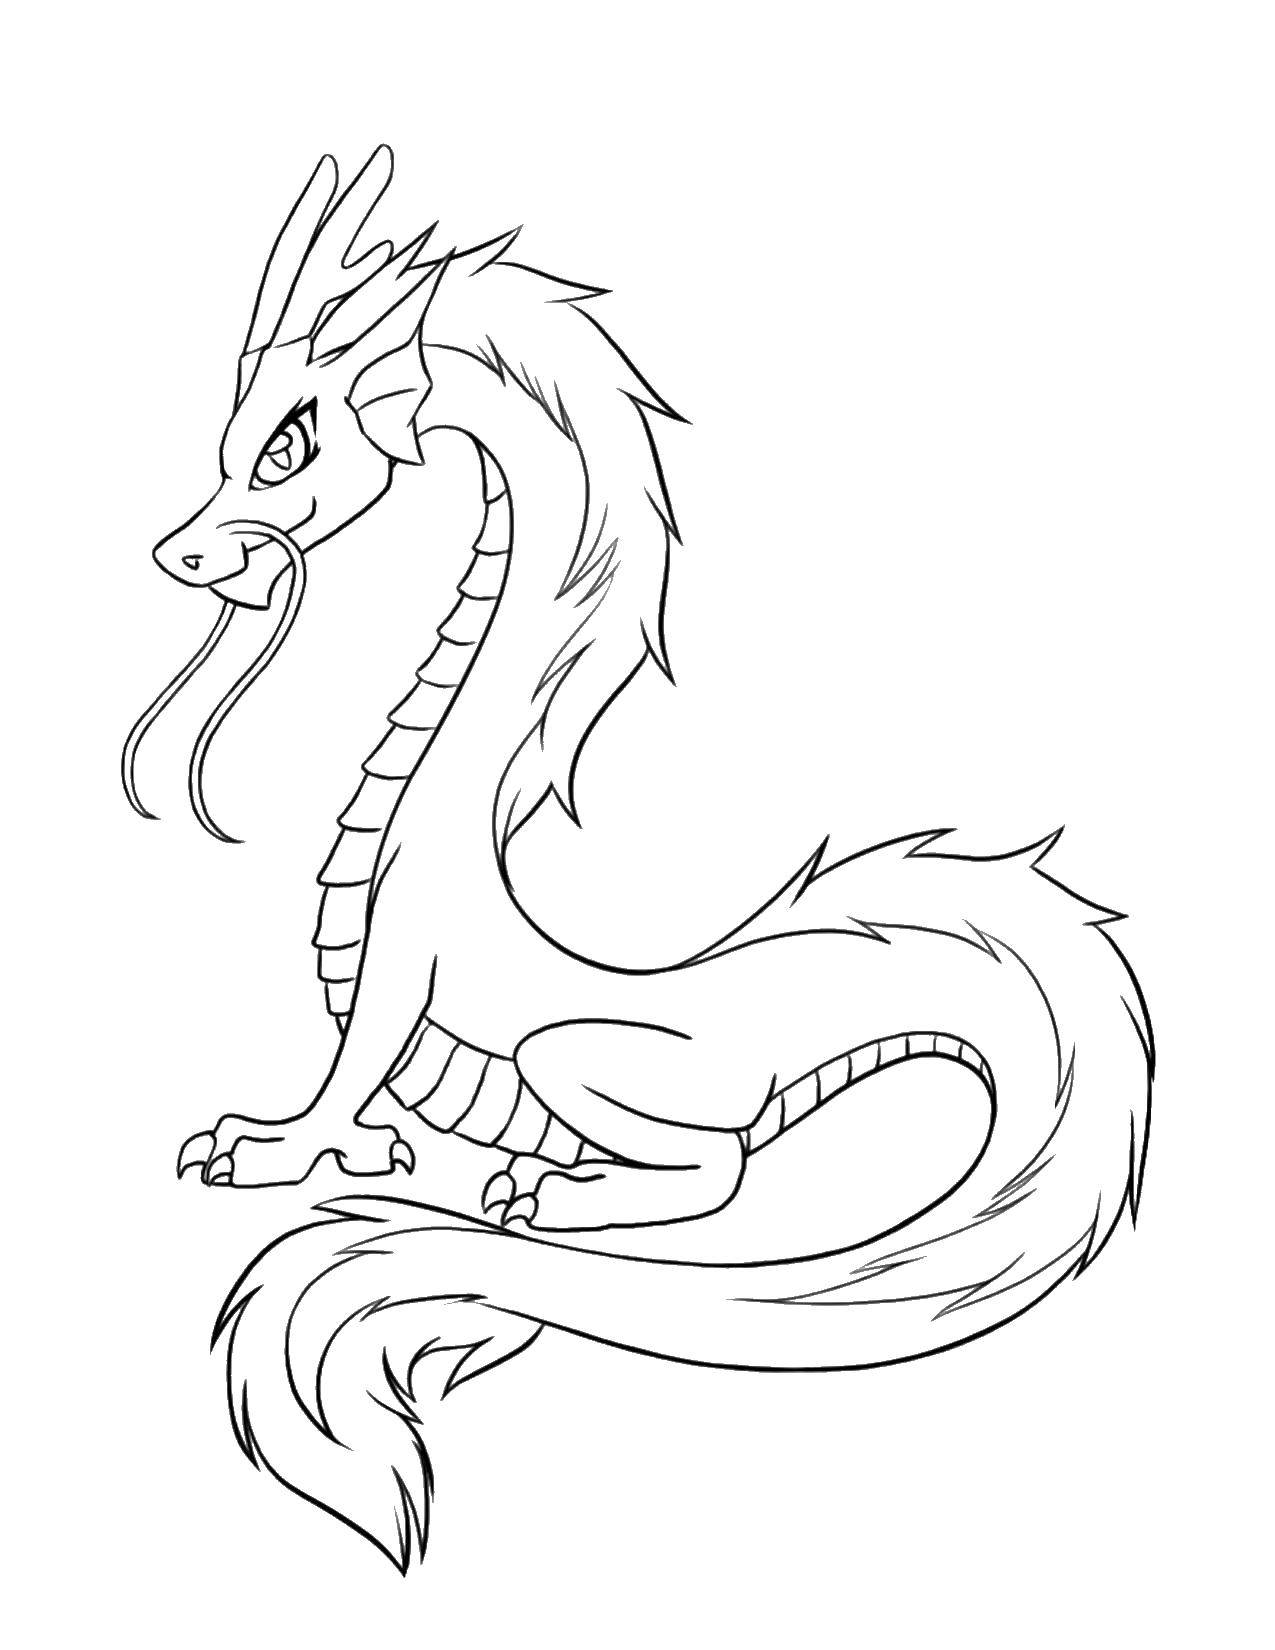 Coloring Chinese dragon.. Category Dragons. Tags:  Dragons.